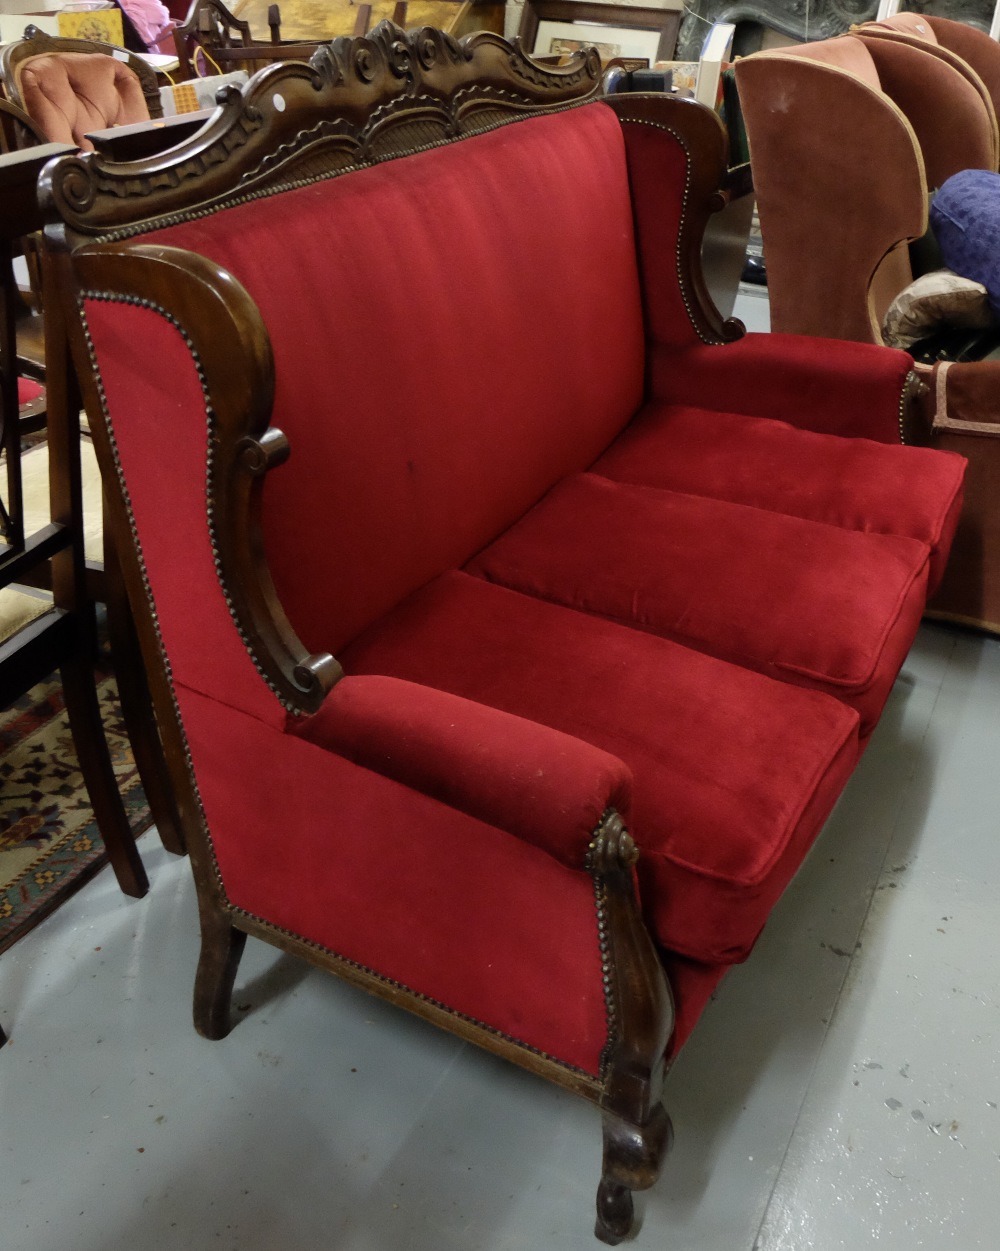 Mahogany framed 3 seater settee with carved top rail and sabre front legs, 56"w x 45"h x 28"d - Image 2 of 2